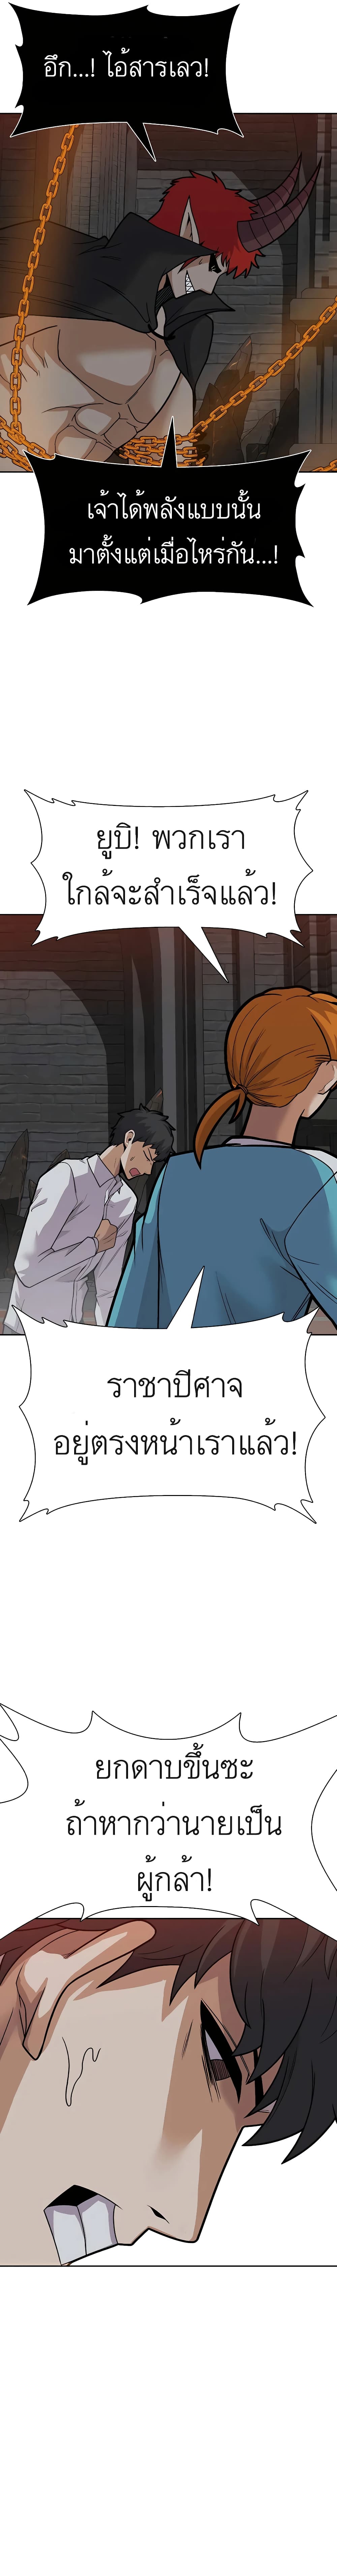 Raising Newbie Heroes In Another World ตอนที่ 31 (2)